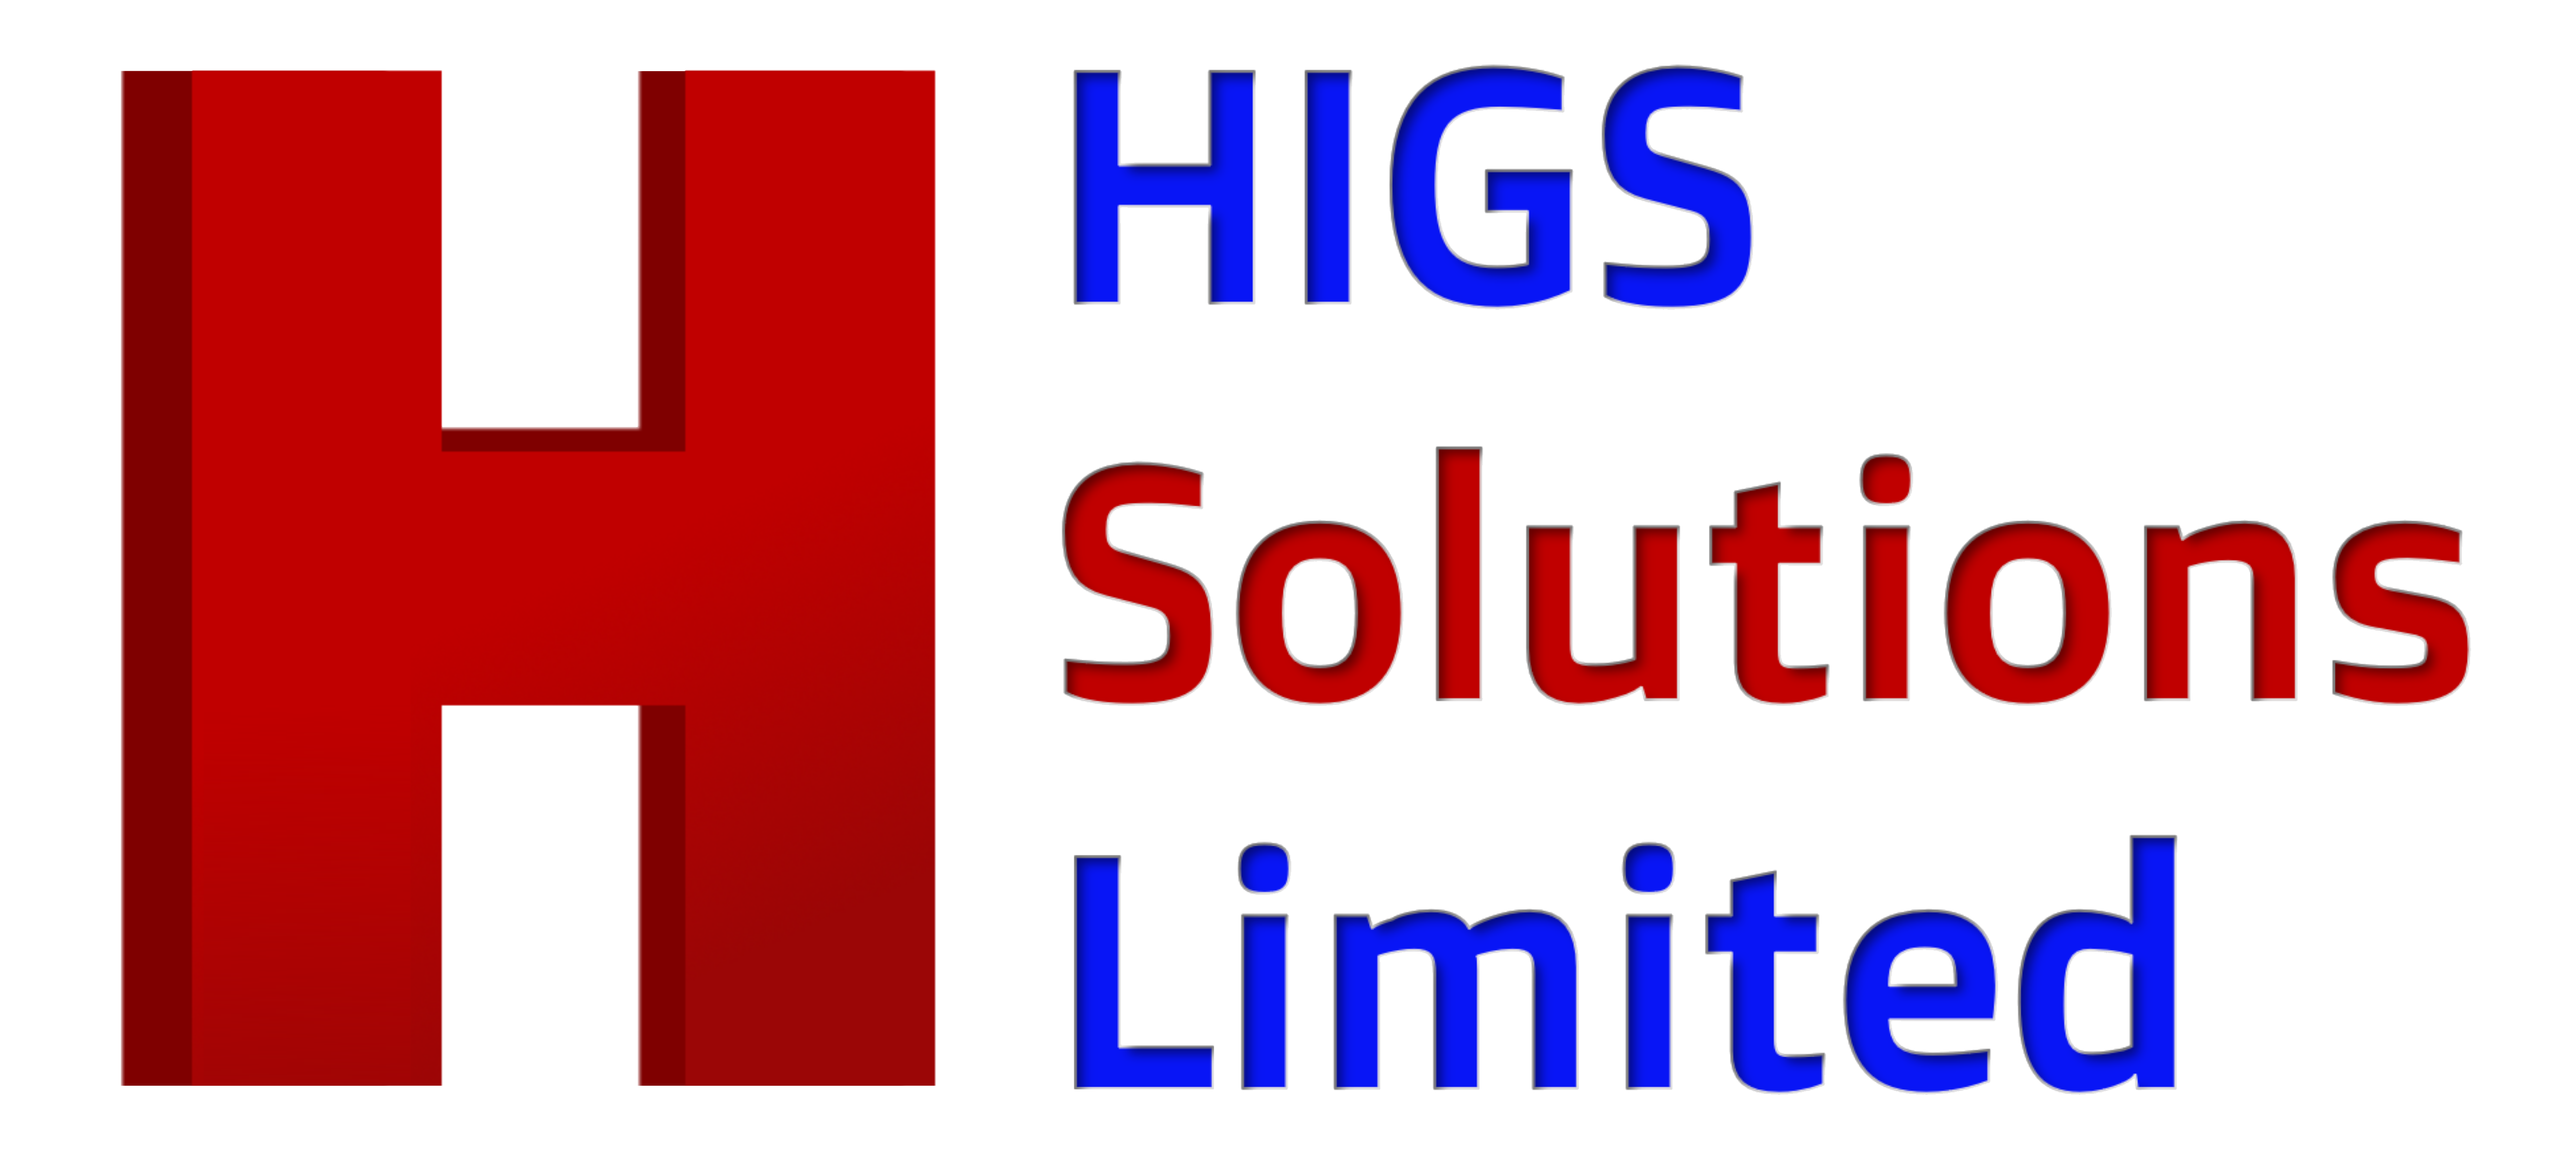 HIGS Solutions Limited Transparent PNG